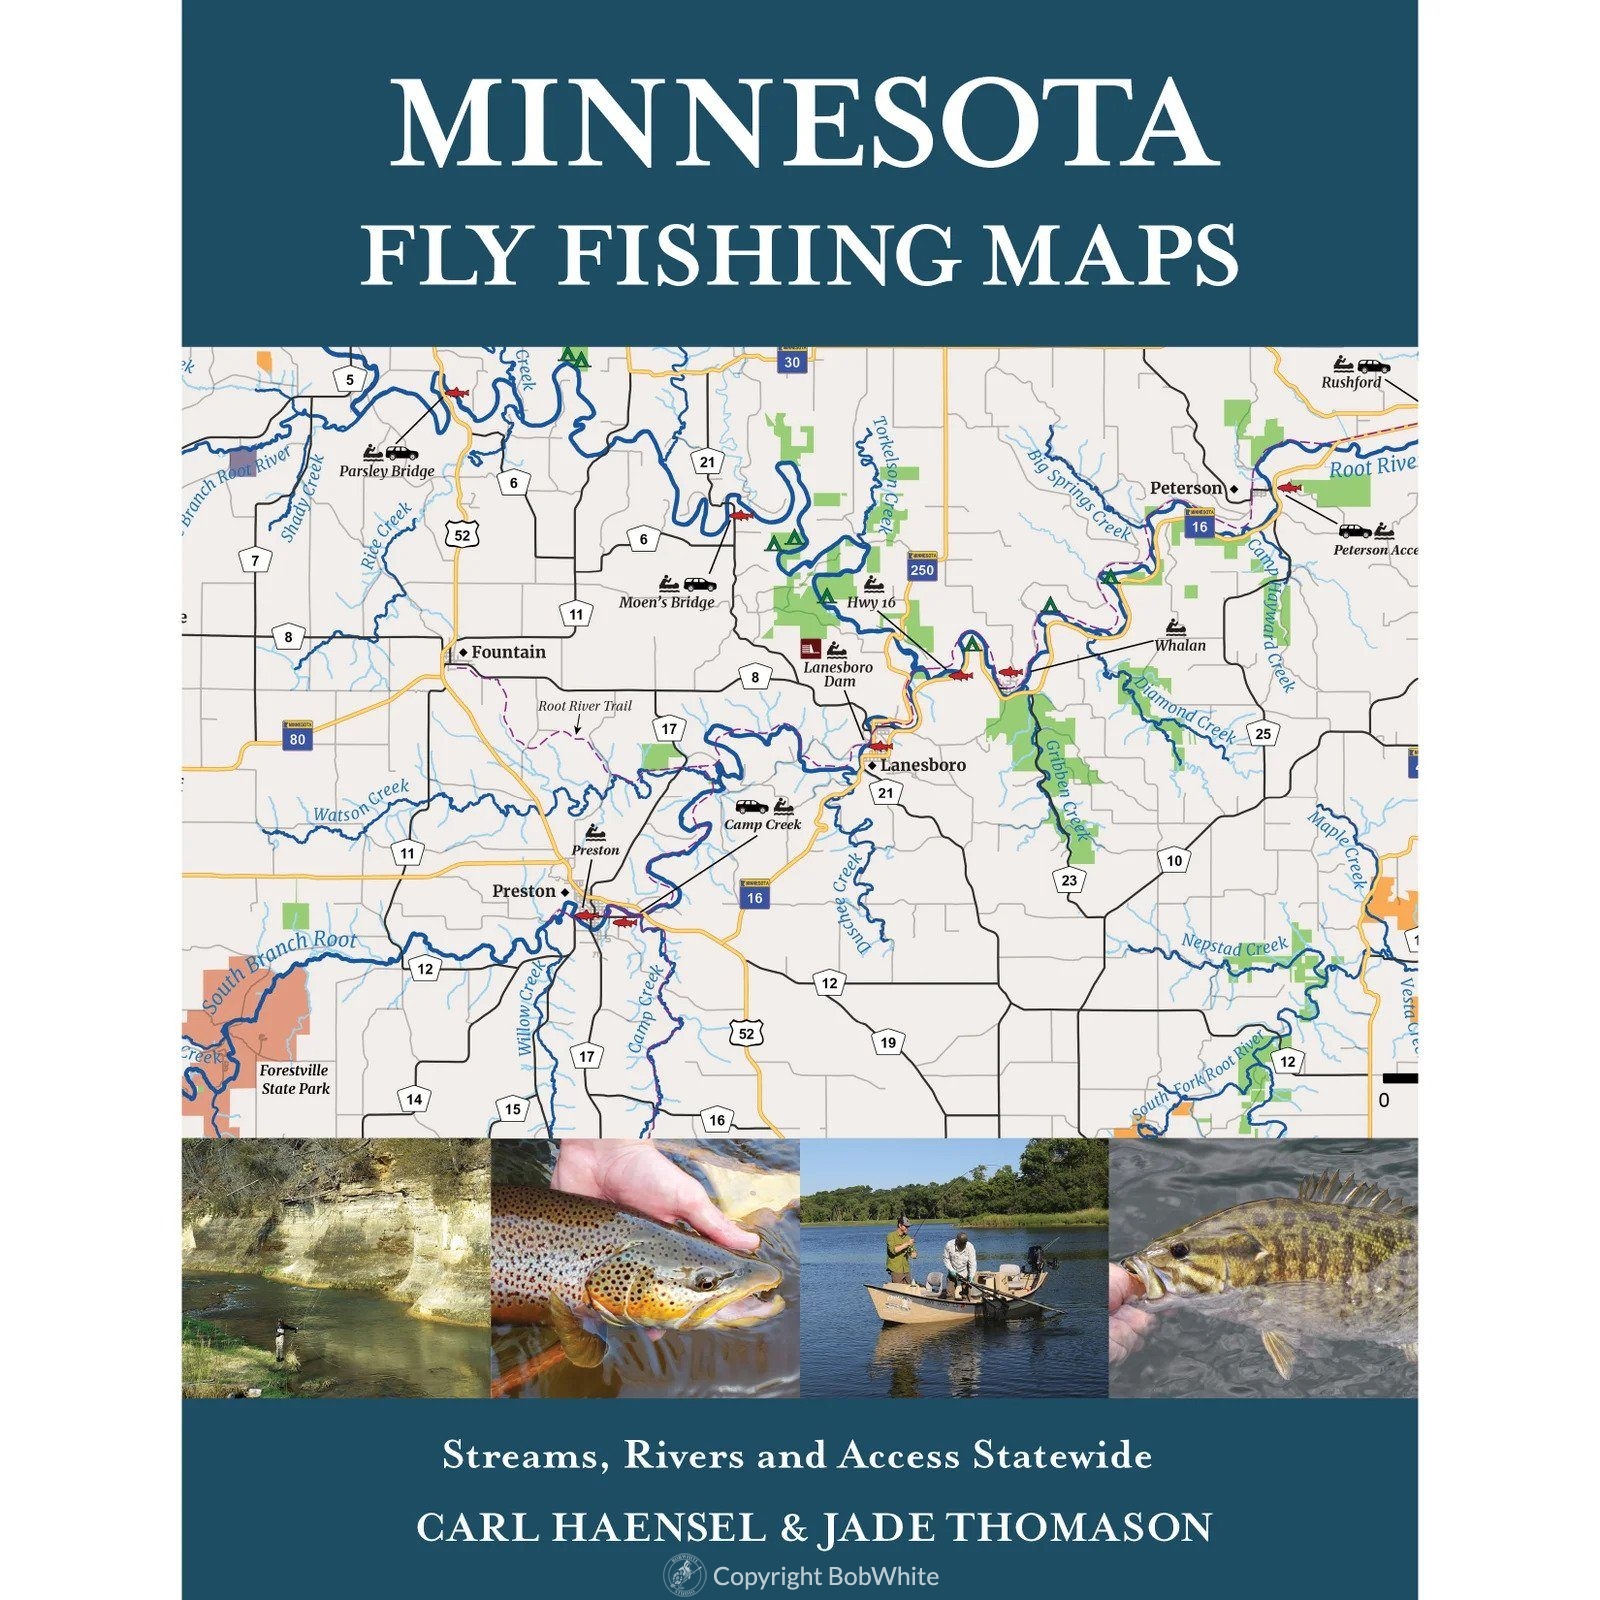 Book: Fly-Fishing for Trout in Southeastern Minnesota, explores